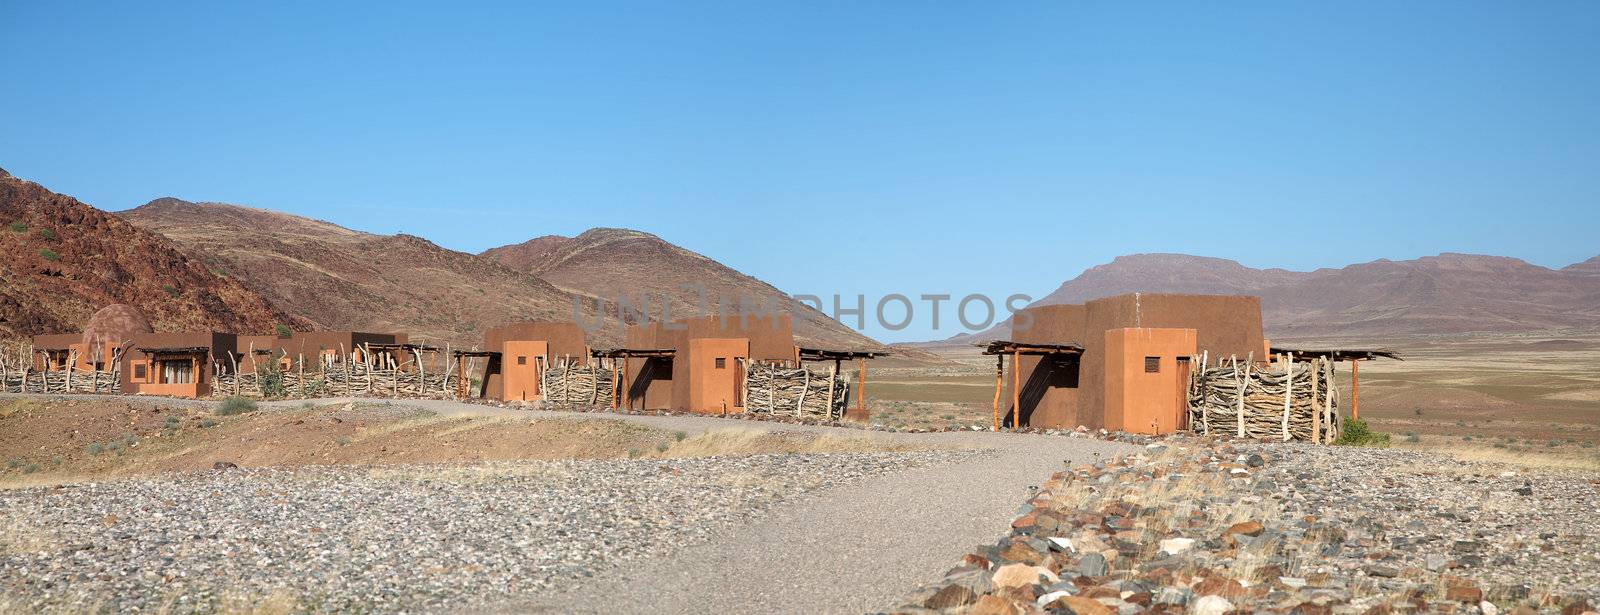 Five individual rooms in a Lodge facing the valley and the desert of Namibia - Puros, Conservation area in Kaokoland - Namibia